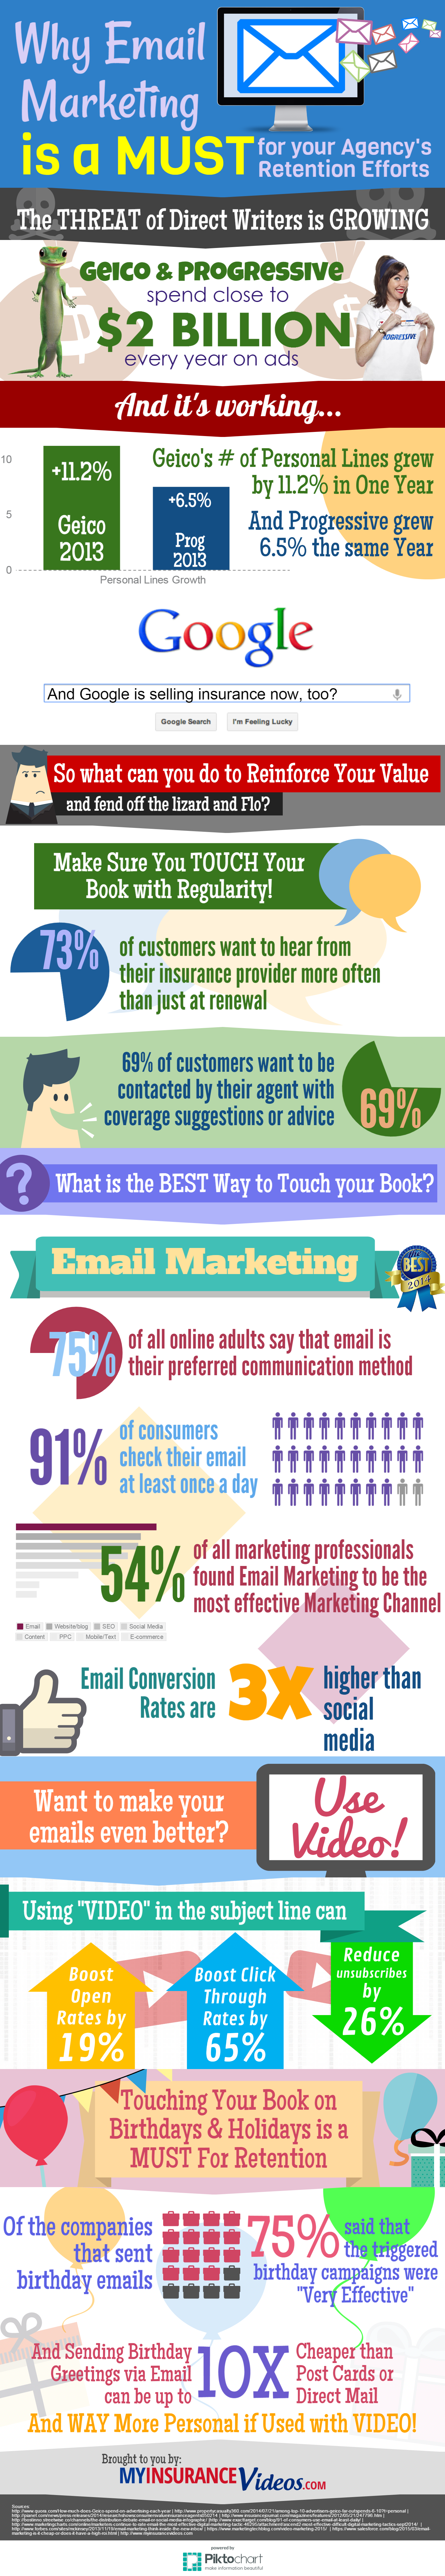 Why_Email_Marketing_is_a_MUST